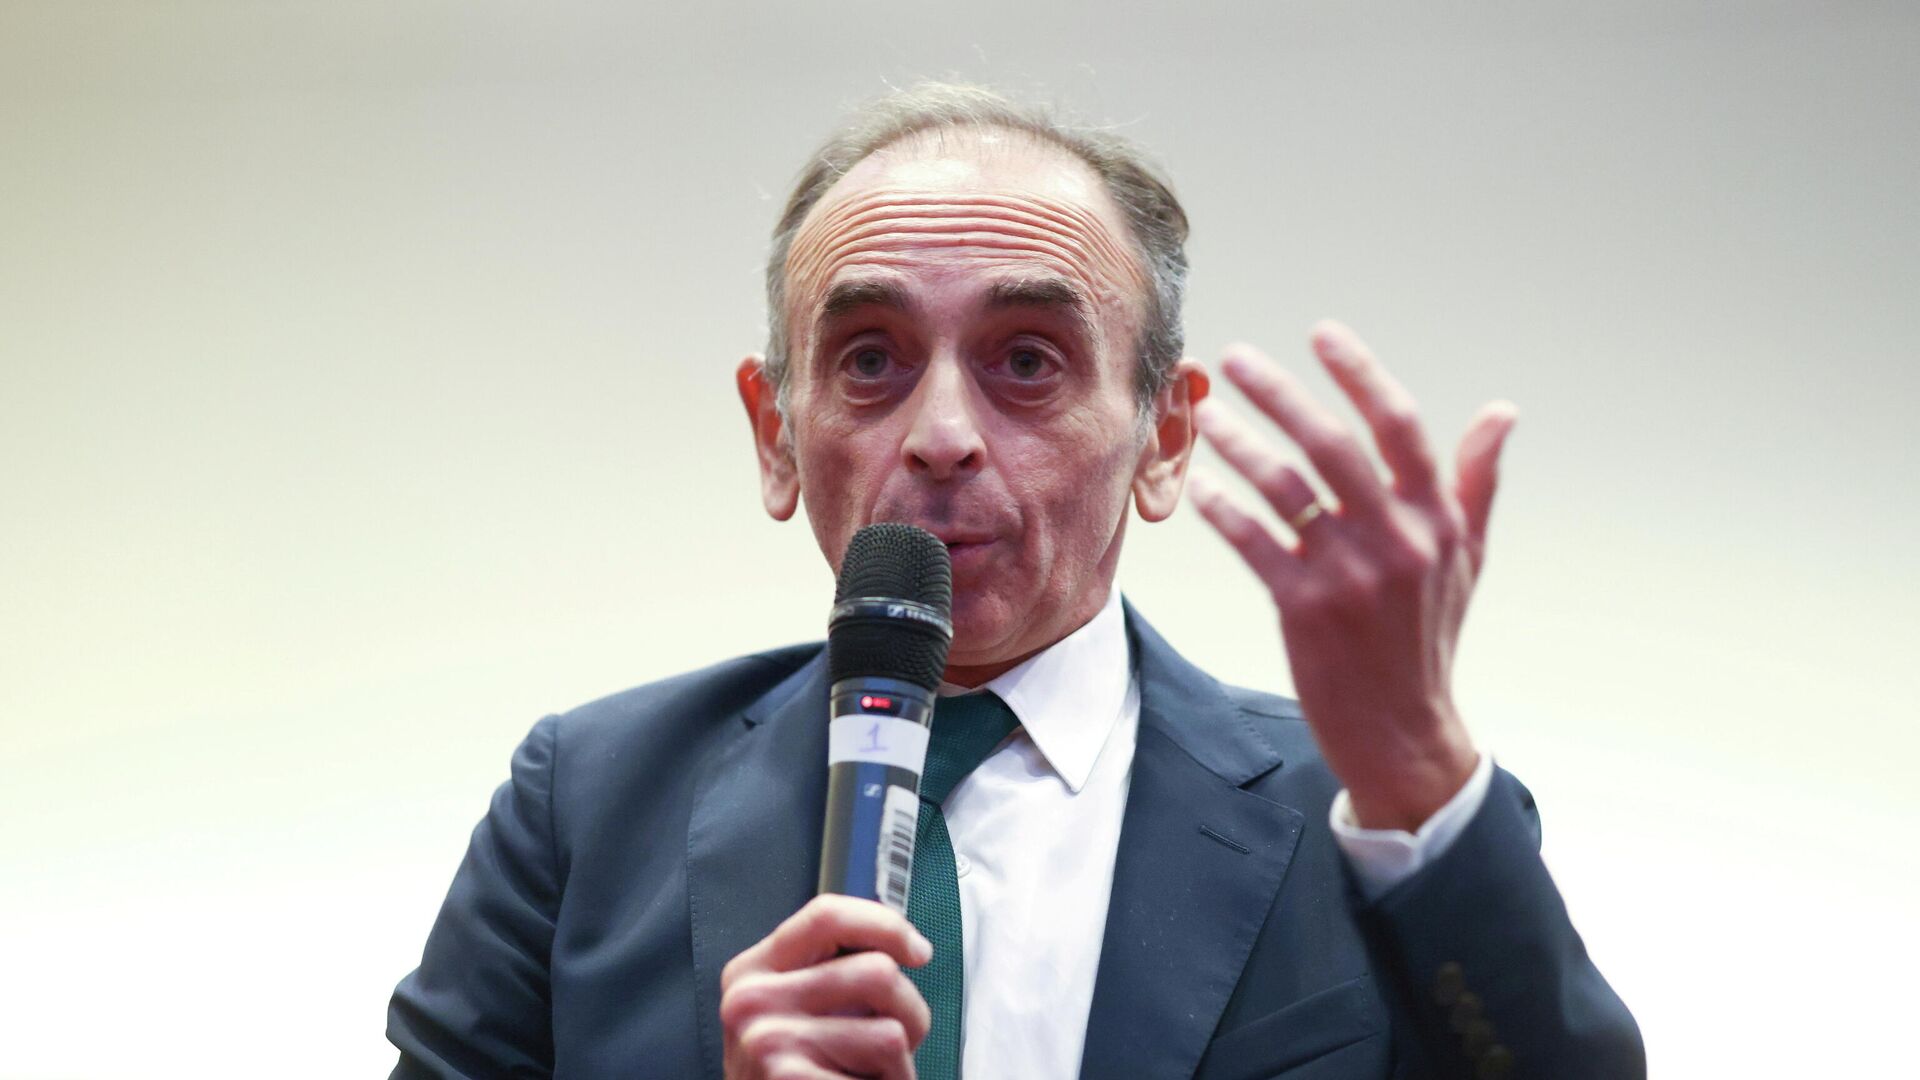 French right-wing commentator Eric Zemmour speaks at an event at the ILEC conference centre, London, Britain, November 19, 2021.  - Sputnik International, 1920, 23.12.2021